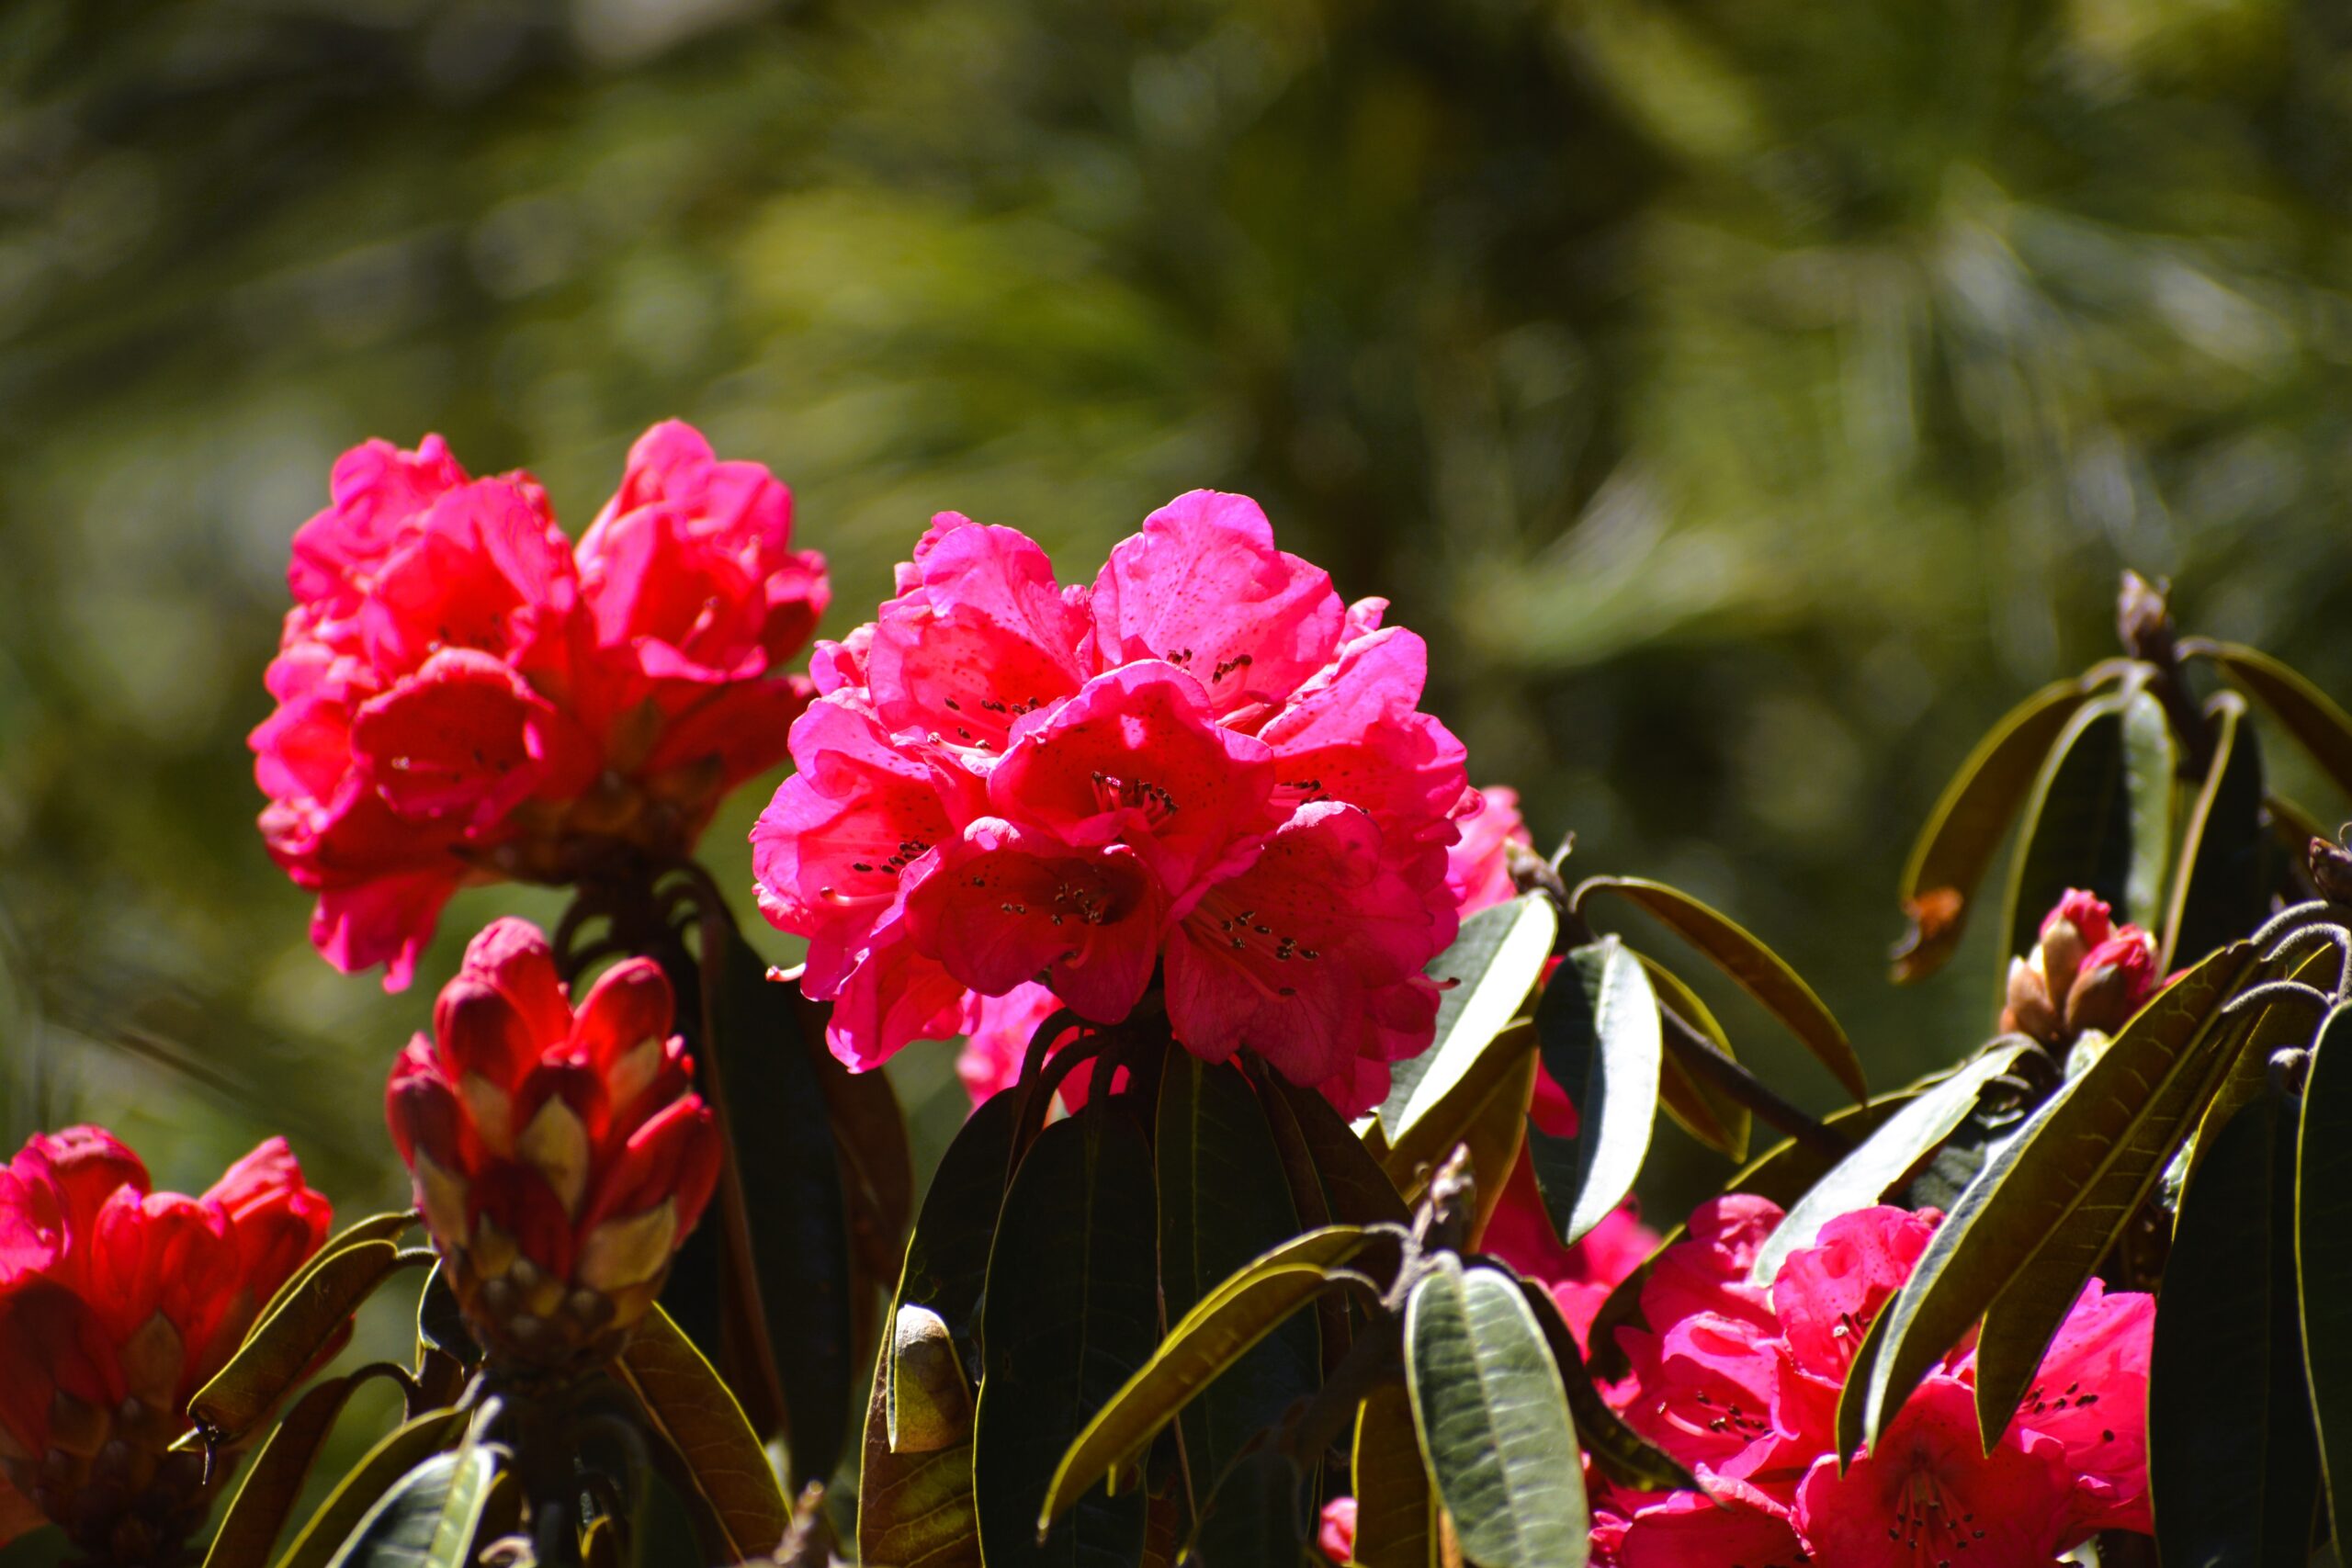 Rhododendron (Lali Gurans)